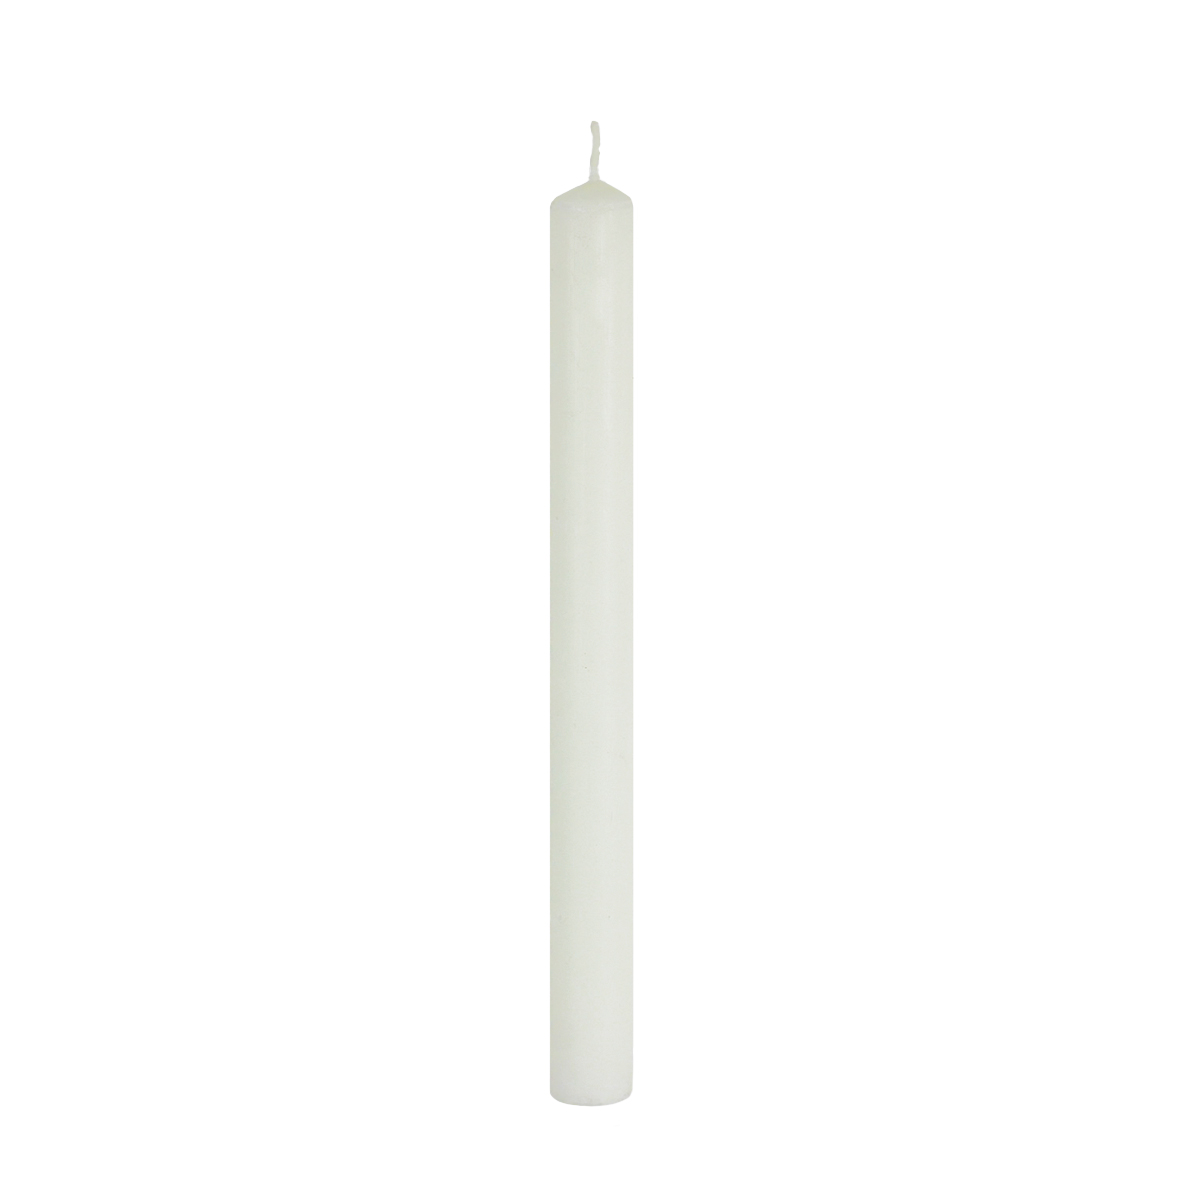 51% BEESWAX 7/8" x 8-1/2" PLAIN END CANDLE STICK